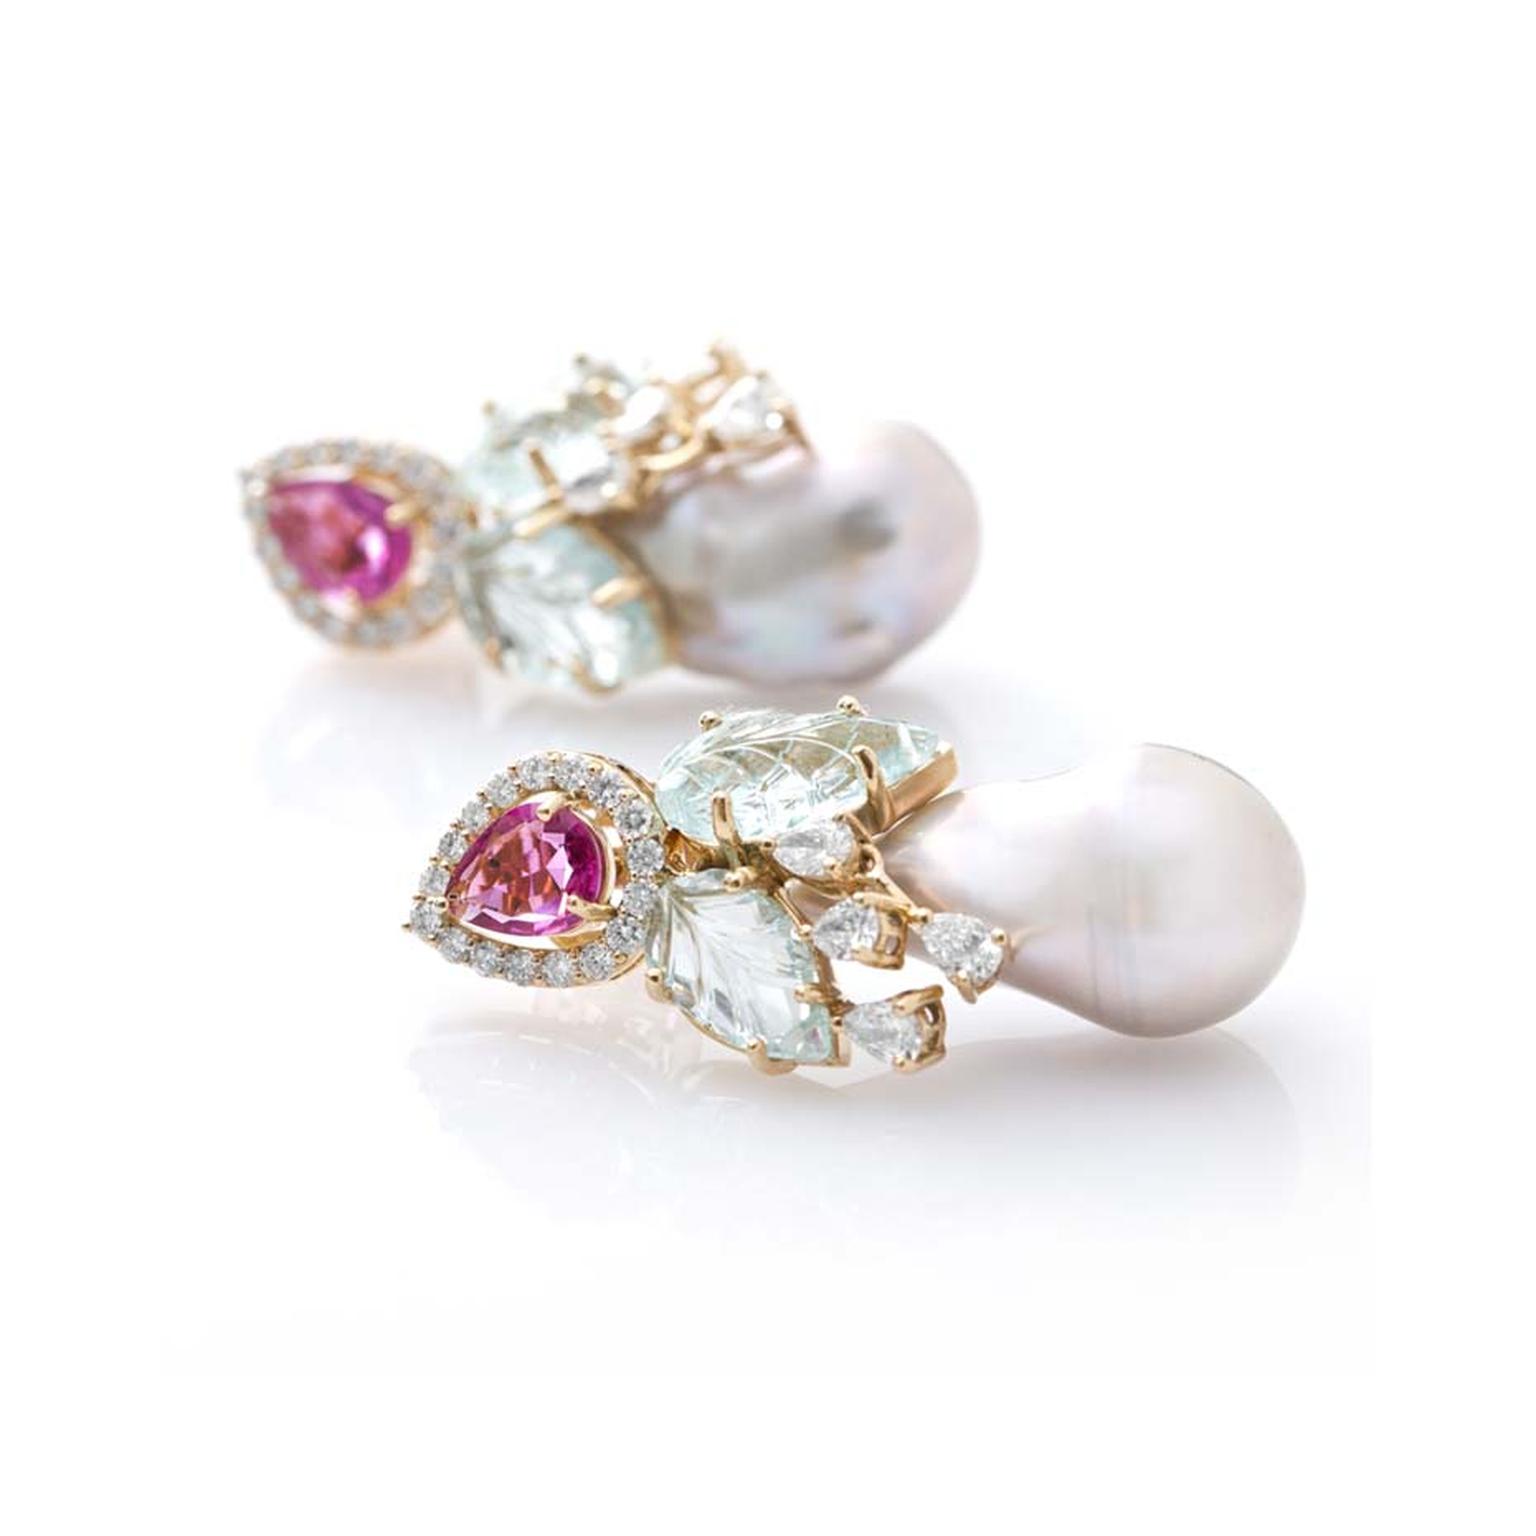 Fahra Khan_Le Jardin Exotique_Baroque pearl earrings in 18ct yellow gold with rubellite, carved leaf aquamarines and diamonds by Farah Khan jewellery.jpg